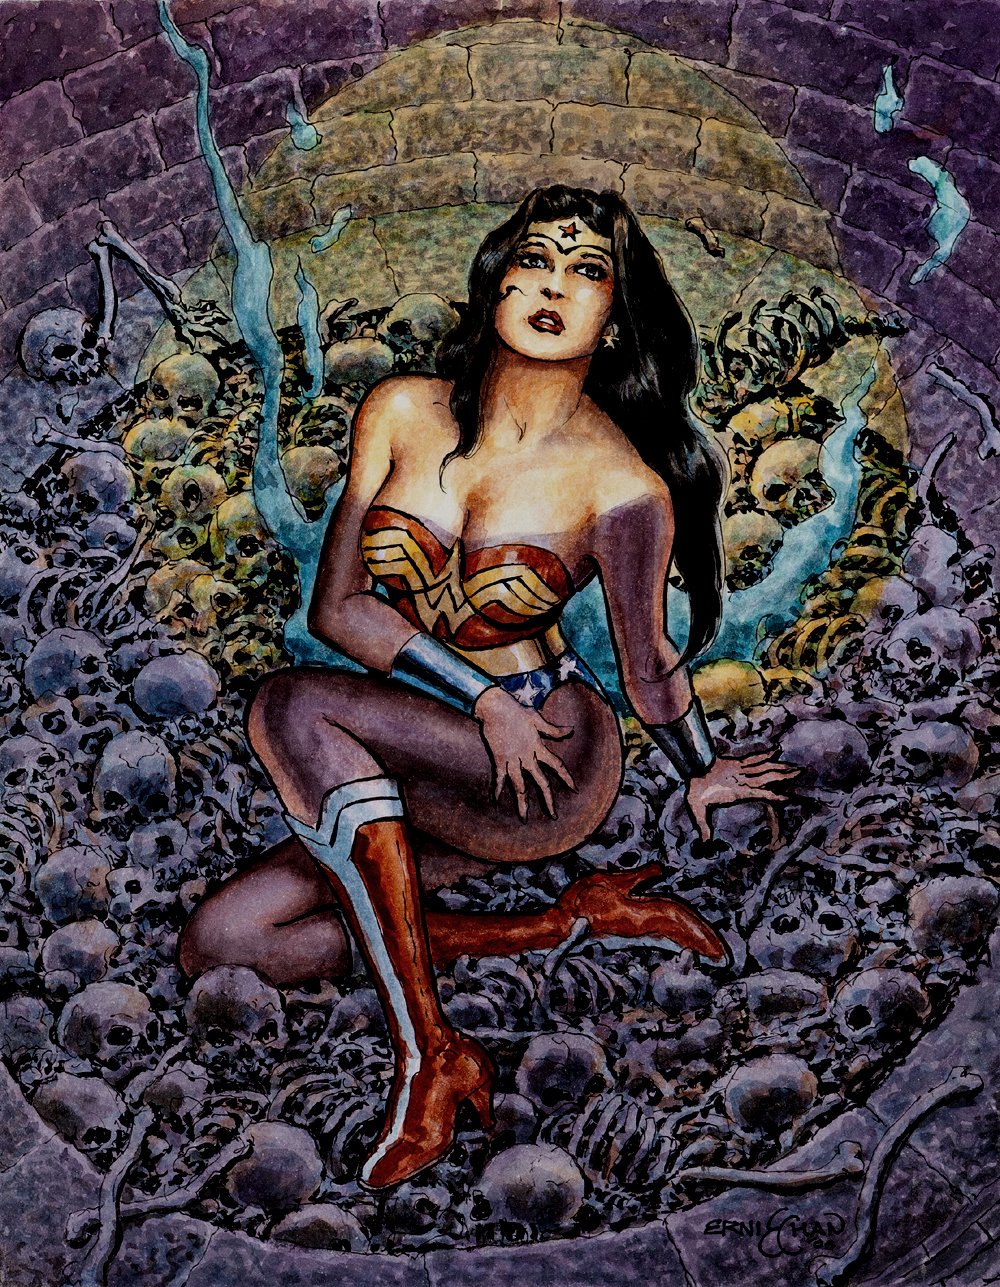 Image of Wonder woman Captured In A Well With Dozens Of Skeletons! (2006)